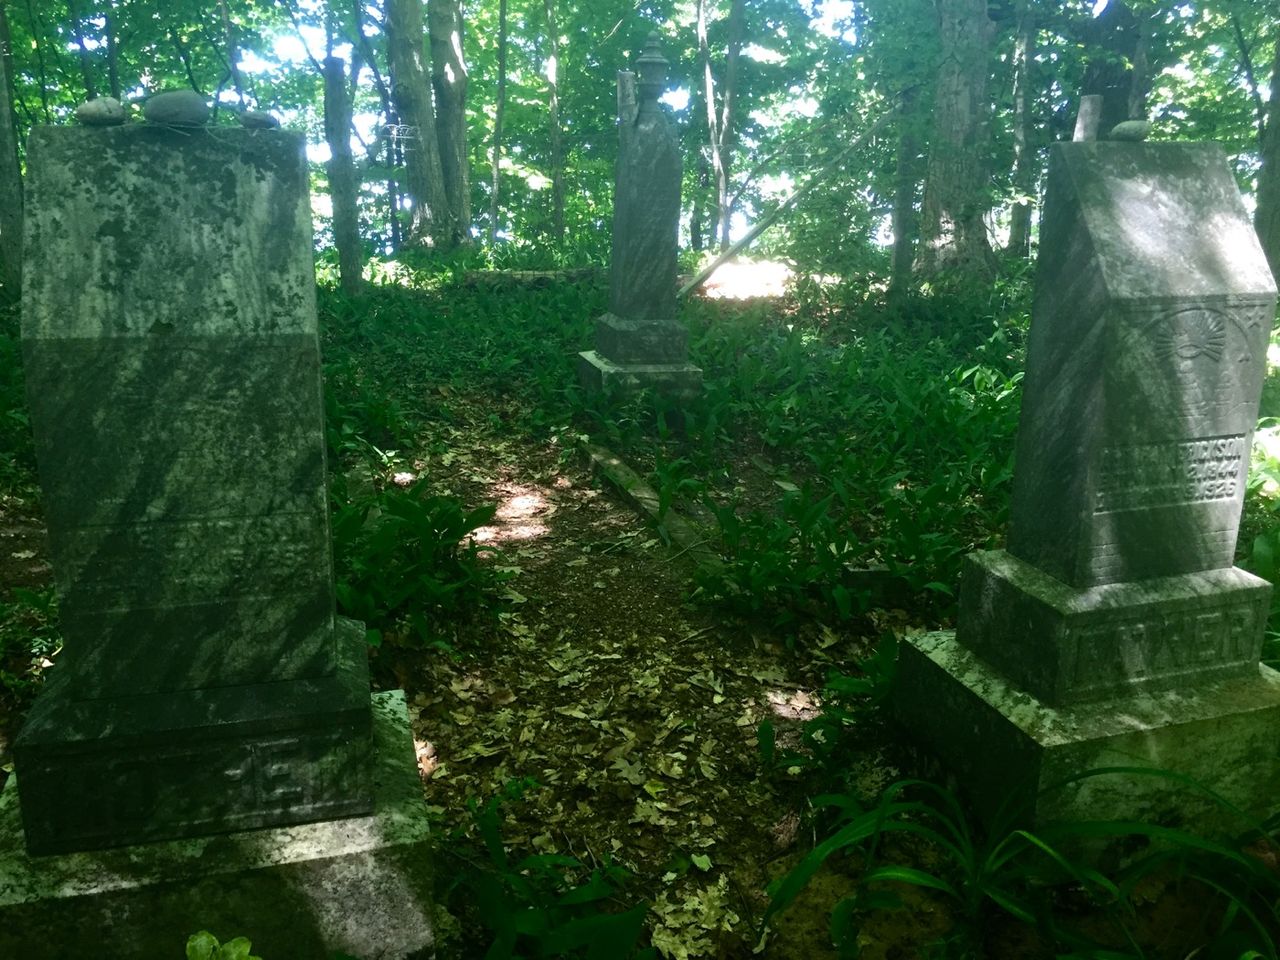 Cemetery in the woods.